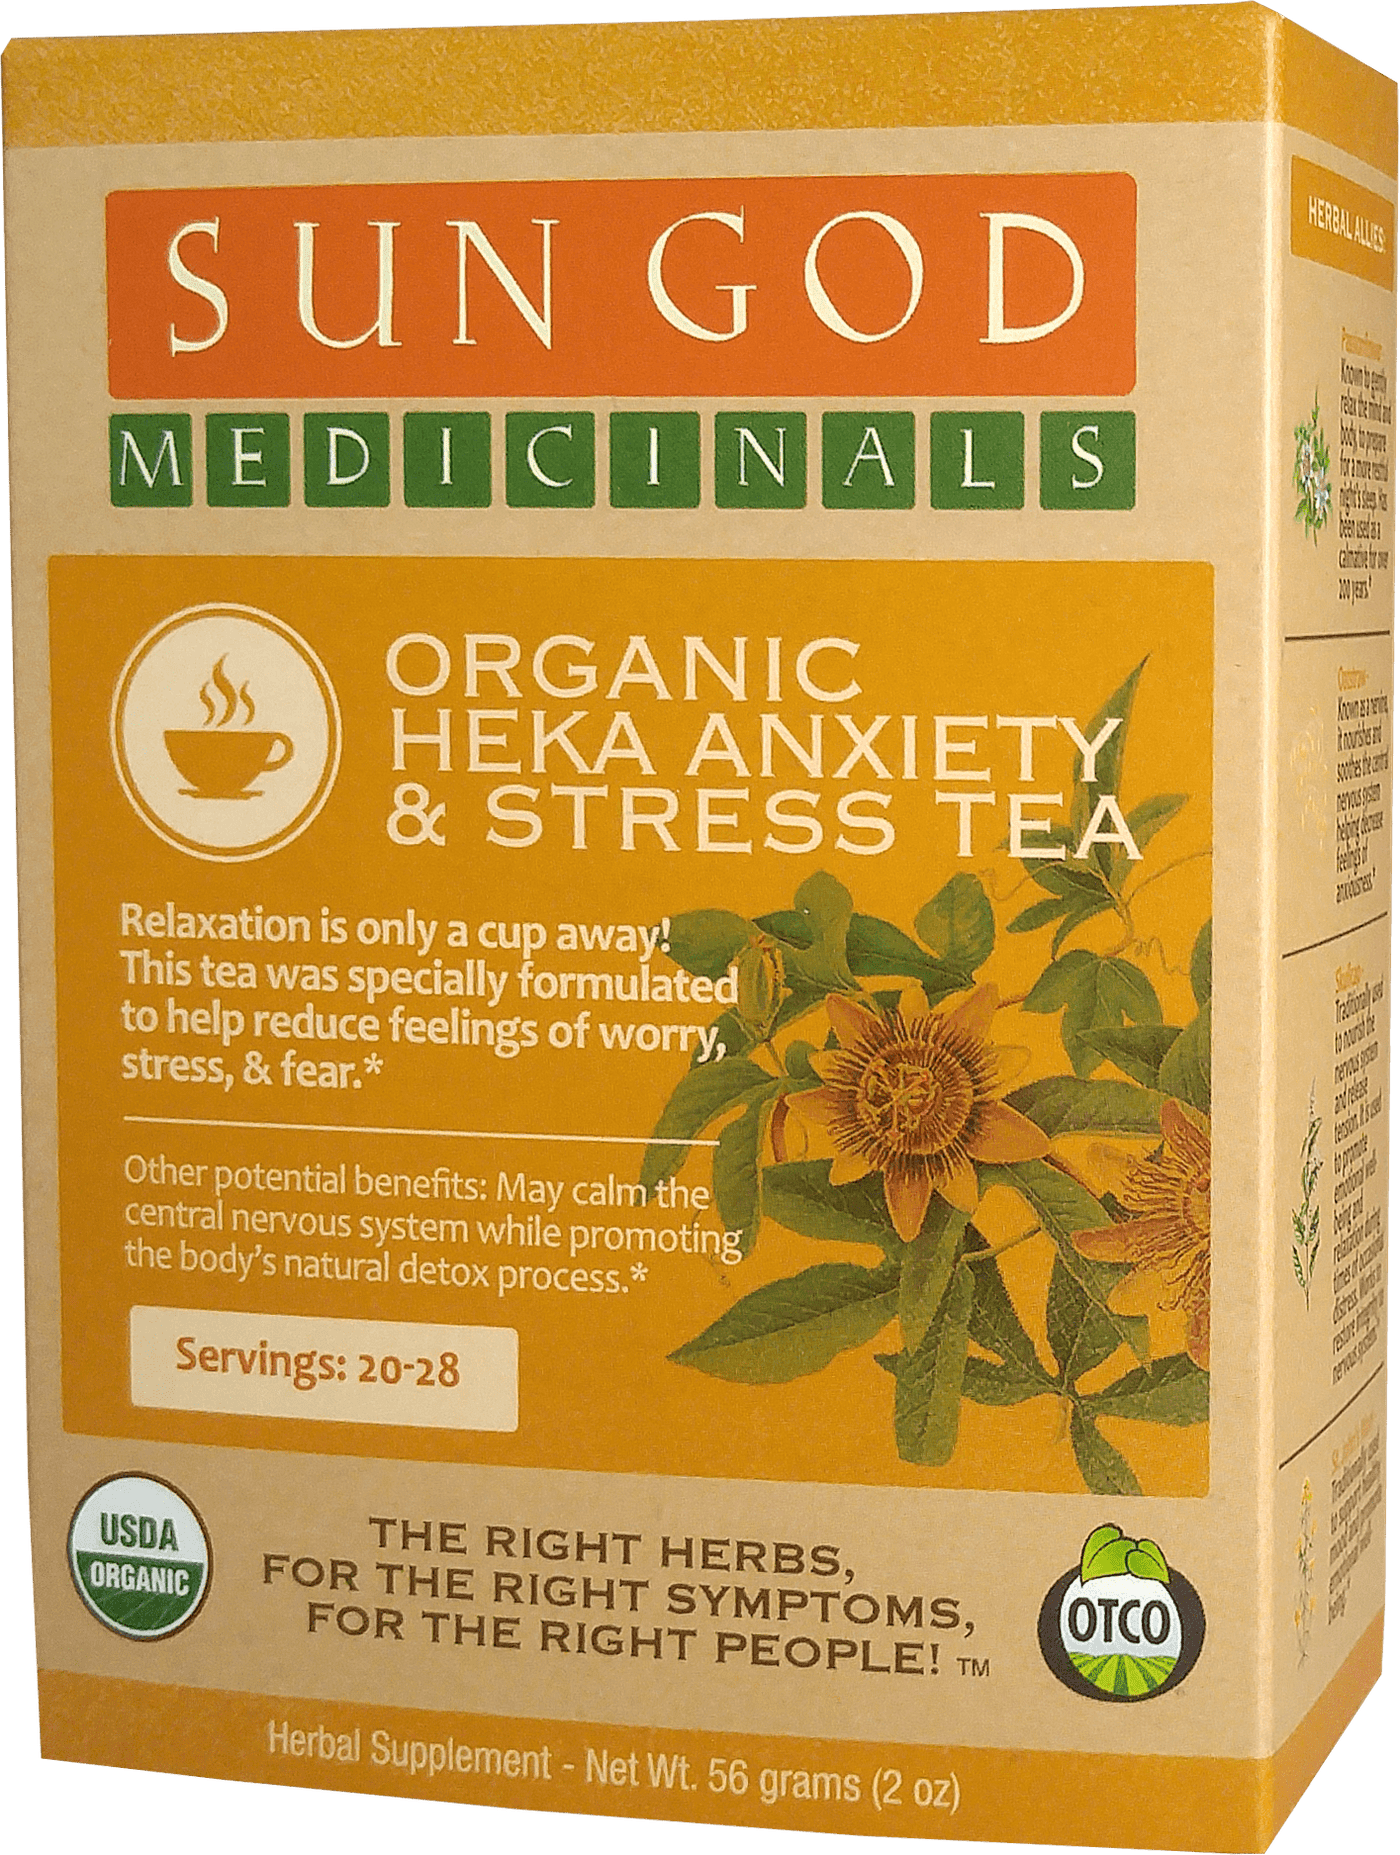 Mild Anxiety, Stress, and Fear Relief Gift Box - Sun God Medicinals